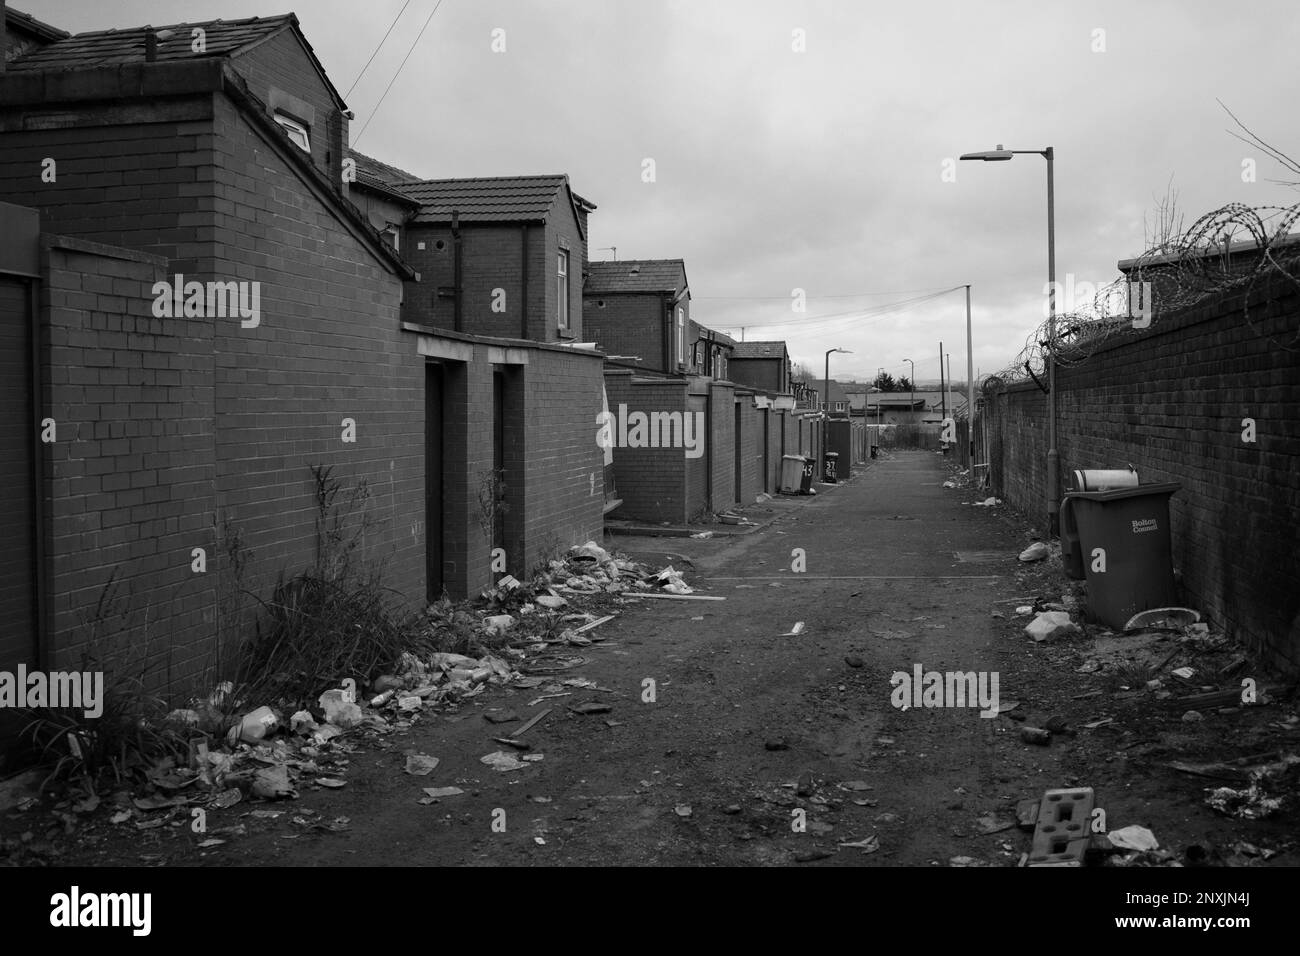 Typical UK 'back street' in a northern town looking onto the rear of terraced houses, with lots of litter or waste on the ground. Bolton, England, UK Stock Photo